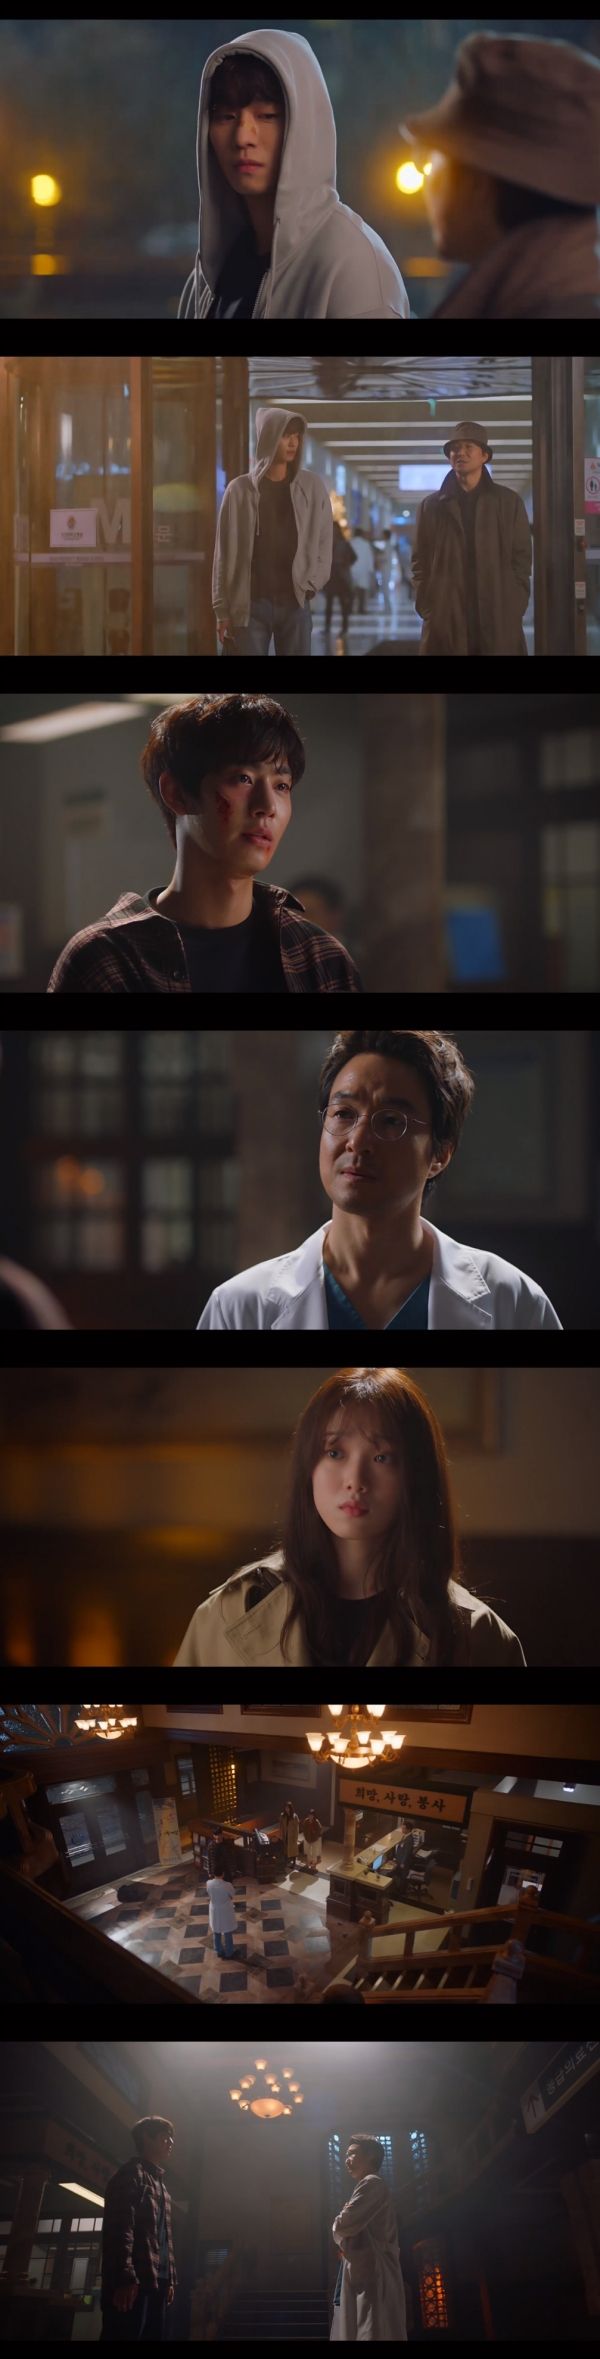 Han Suk-kyu faces Ahn Hyo-seop and Lee Sung-kyungIn SBSs drama Romantic Doctor Kim Sabu 2 (playplayplay by Kang Eun-kyung, directed by Yoo In-sik), which was broadcast on the 6th, Han Suk-kyu welcomed Seo Woo-jin (Ahn Hyo-seop) and Cha Eun-jae (Lee Sung-kyung) at Doldam Hospital.On the same day, Kim watched the people of Geosan University Hospital, and Kim Sabu looked at the surgery and found out the cause, and in the emergency room, he took care of the patient.The emergency doctor was angry at Kim Sabu, saying, Do you have a doctor who is a branch doctor without permission?The center director said, Why do you come to another hospital and feel uncomfortable?Kim said, I told you about a month ago to send down the GS. The center chief said, Come up because you will have a place in the main area.After this, Seo Woo-jin suffered a shame by hearing from his seniors, There is a rumor that he works in the house.Because of you, Hyunjun closed the hospital and sat on the street, said Cha Eun-jae, if you need DC, please contact me at any time.The hospital people said, I was shot as an internal complainant. Hyunjun ran the hospital and received a back payment from a medical equipment company, abused the procedure, and performed a substitute operation.Woojin stabbed it up. There was no hospital to accept it after that. The center director brought me to set up weekends and night shifts. Kim Sabu, who watched Seo Woo-jin, suggested, Have you heard of Doldam Hospital? I need GS. If you are interested, come here once.On the other hand, Cha Eun-jae became a doctor at Doldam Hospital after Seo Woo-jin, and Cha Eun-jae, who lost consciousness during surgery, chose the latter during suspension and dispatch of branch offices.